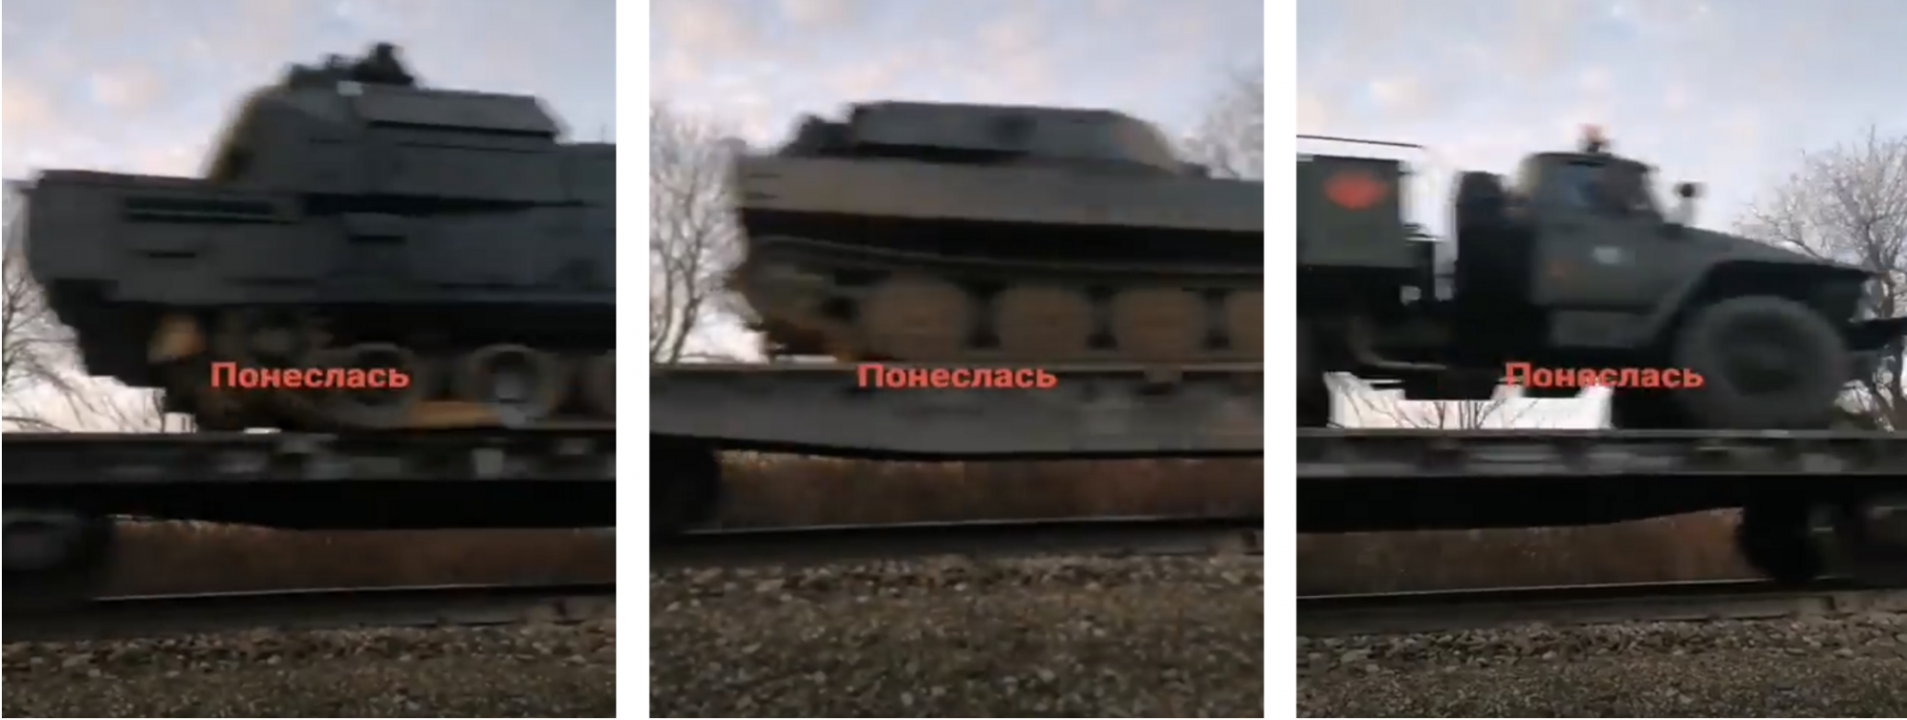 Screenshots of Buk-M3, 2S1, and other equipment from the 34th MRB moving to Kerch, Crimea, with the Russian word for “rushed” superimposed on them.